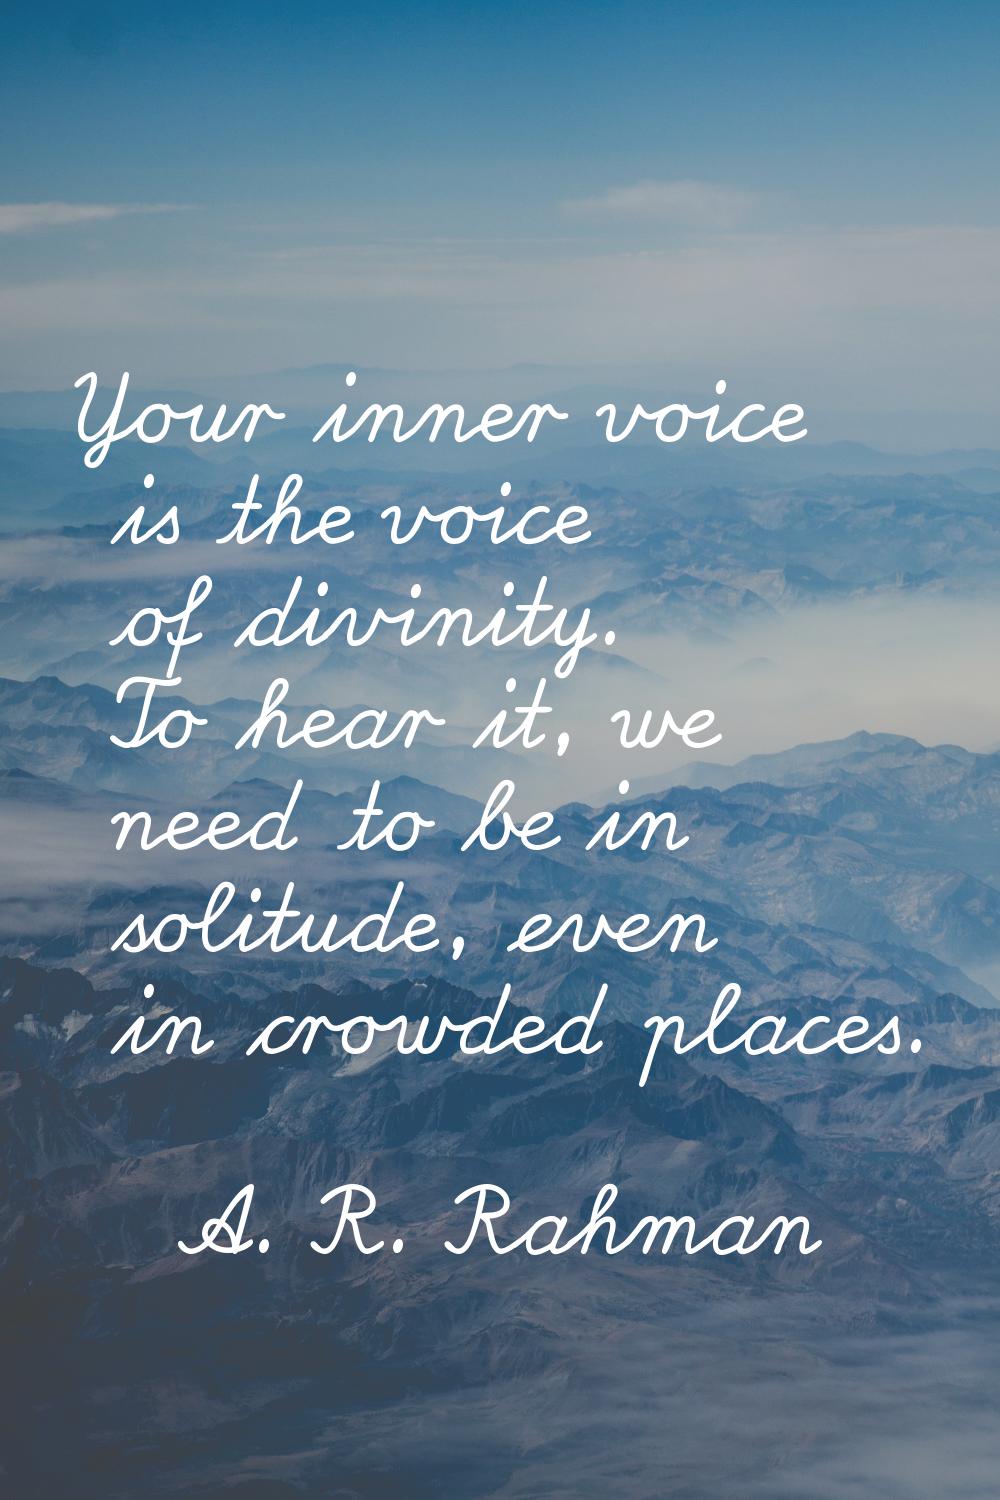 Your inner voice is the voice of divinity. To hear it, we need to be in solitude, even in crowded p